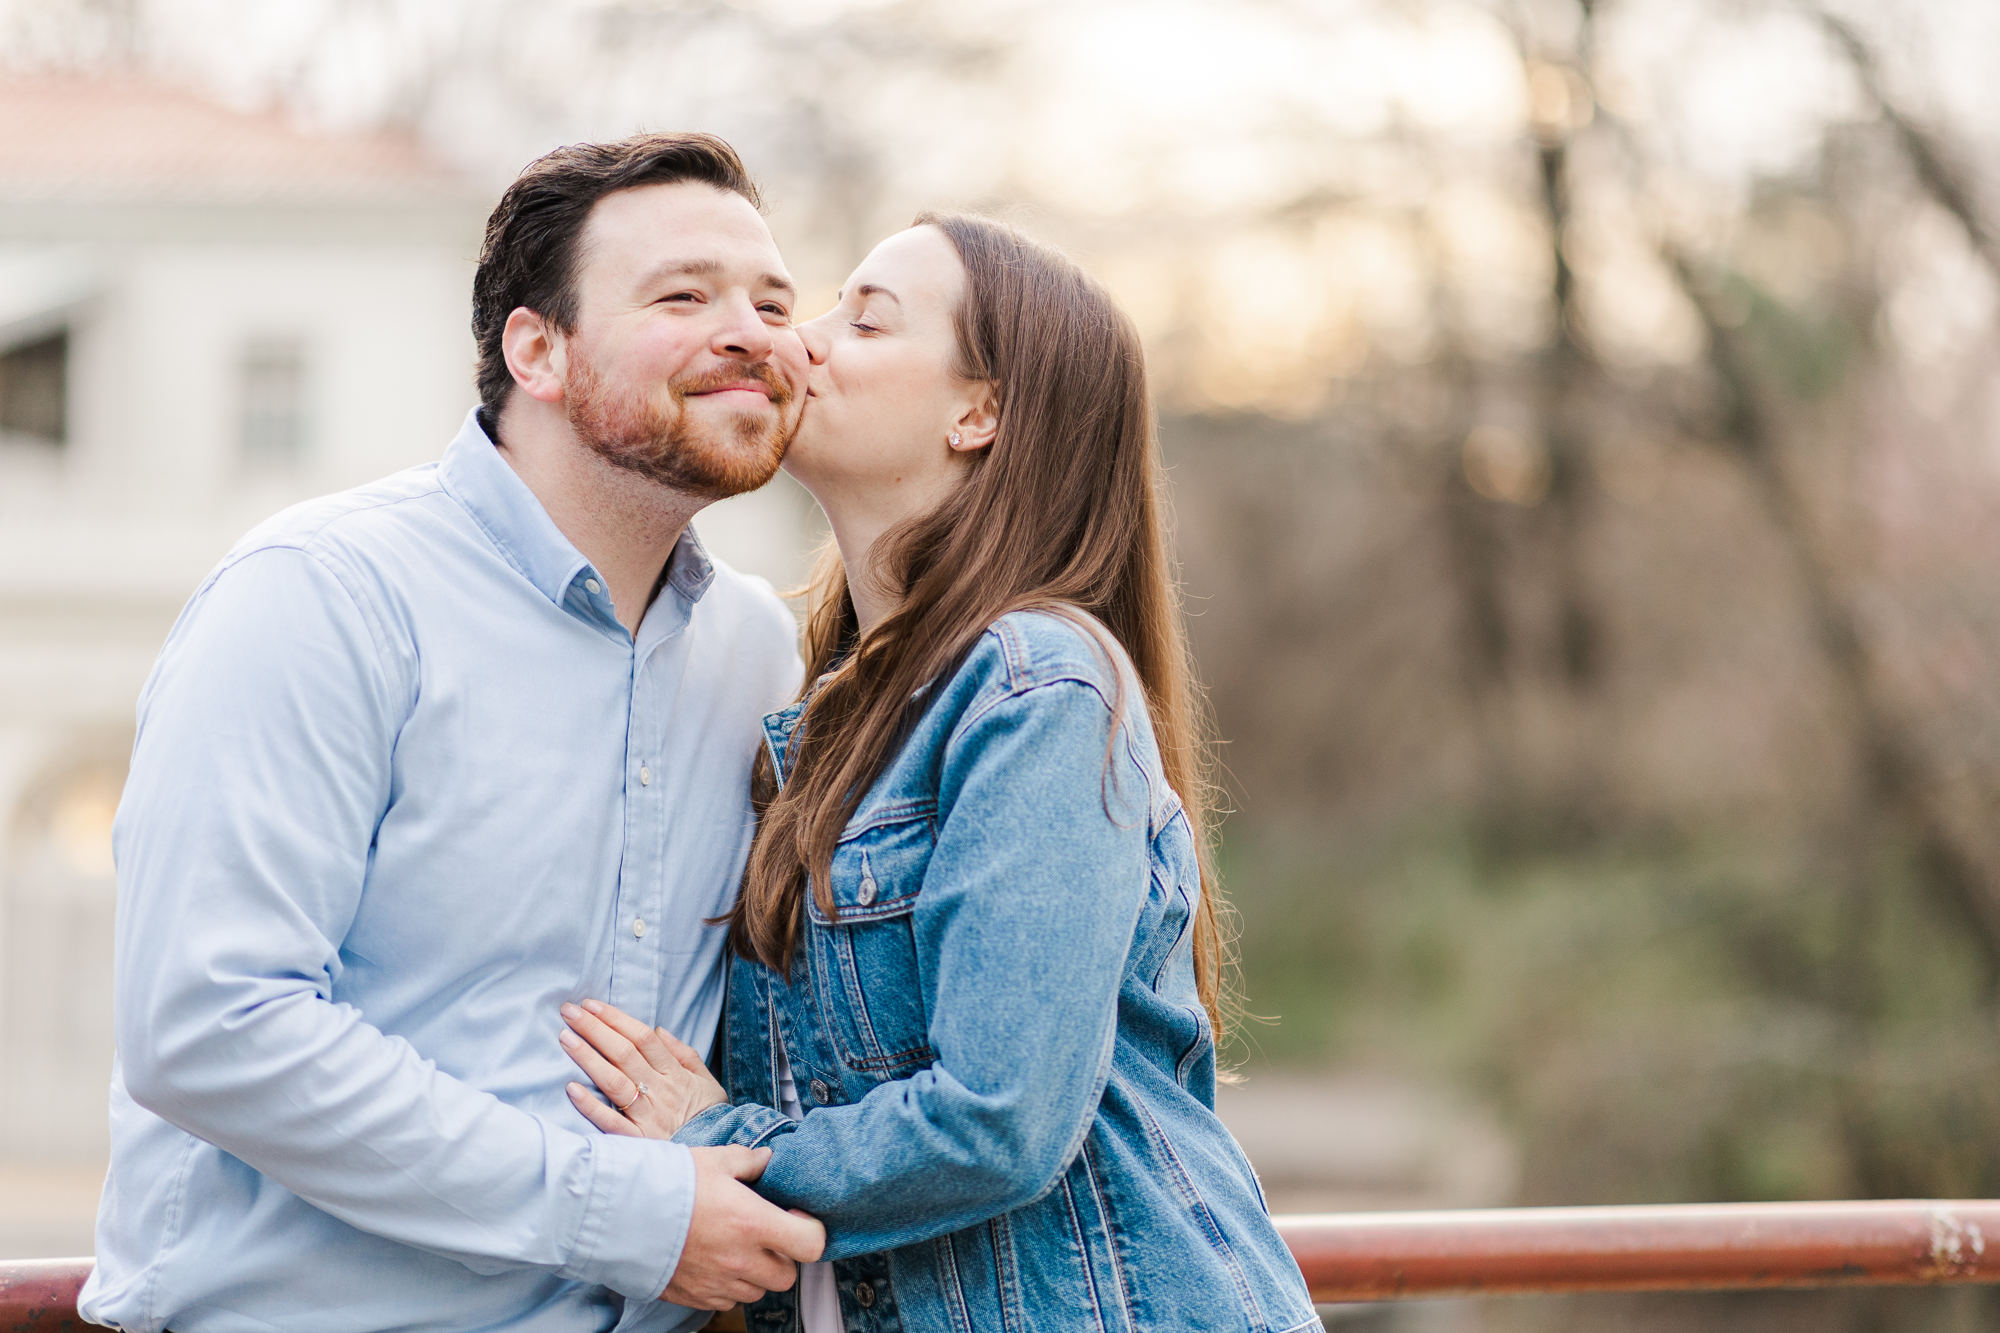 Magical Boathouse Engagement Photos In Prospect Park